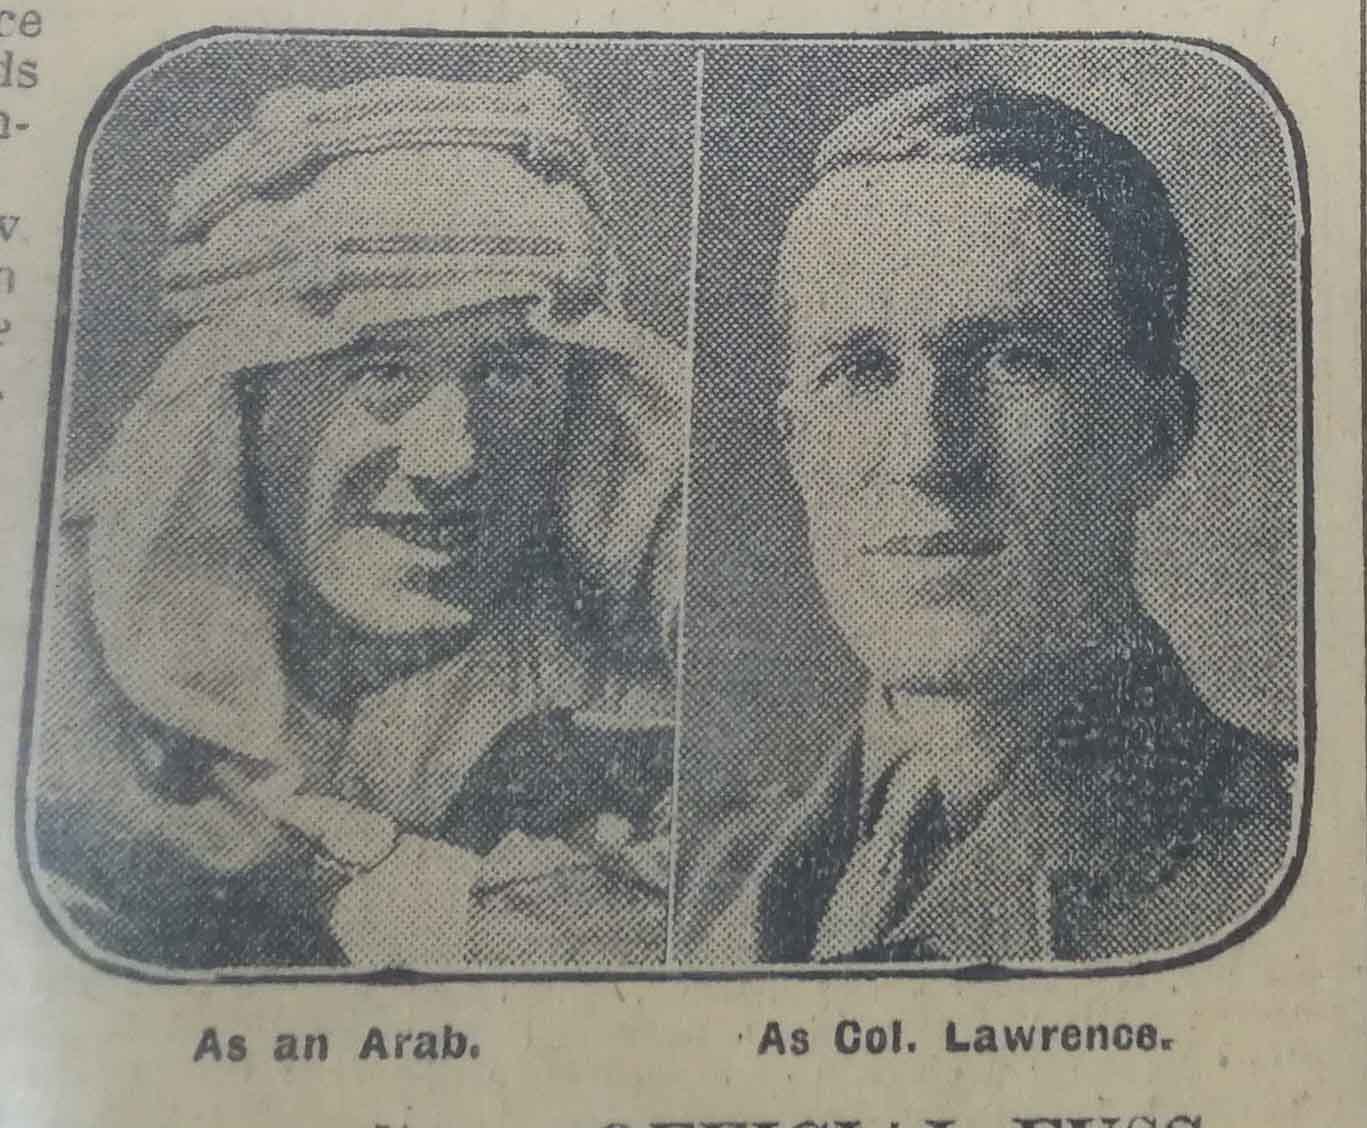 Photograph of T.E. Lawrence taken from a cutting of the Daily News 4 February 1929. WO 374/41077